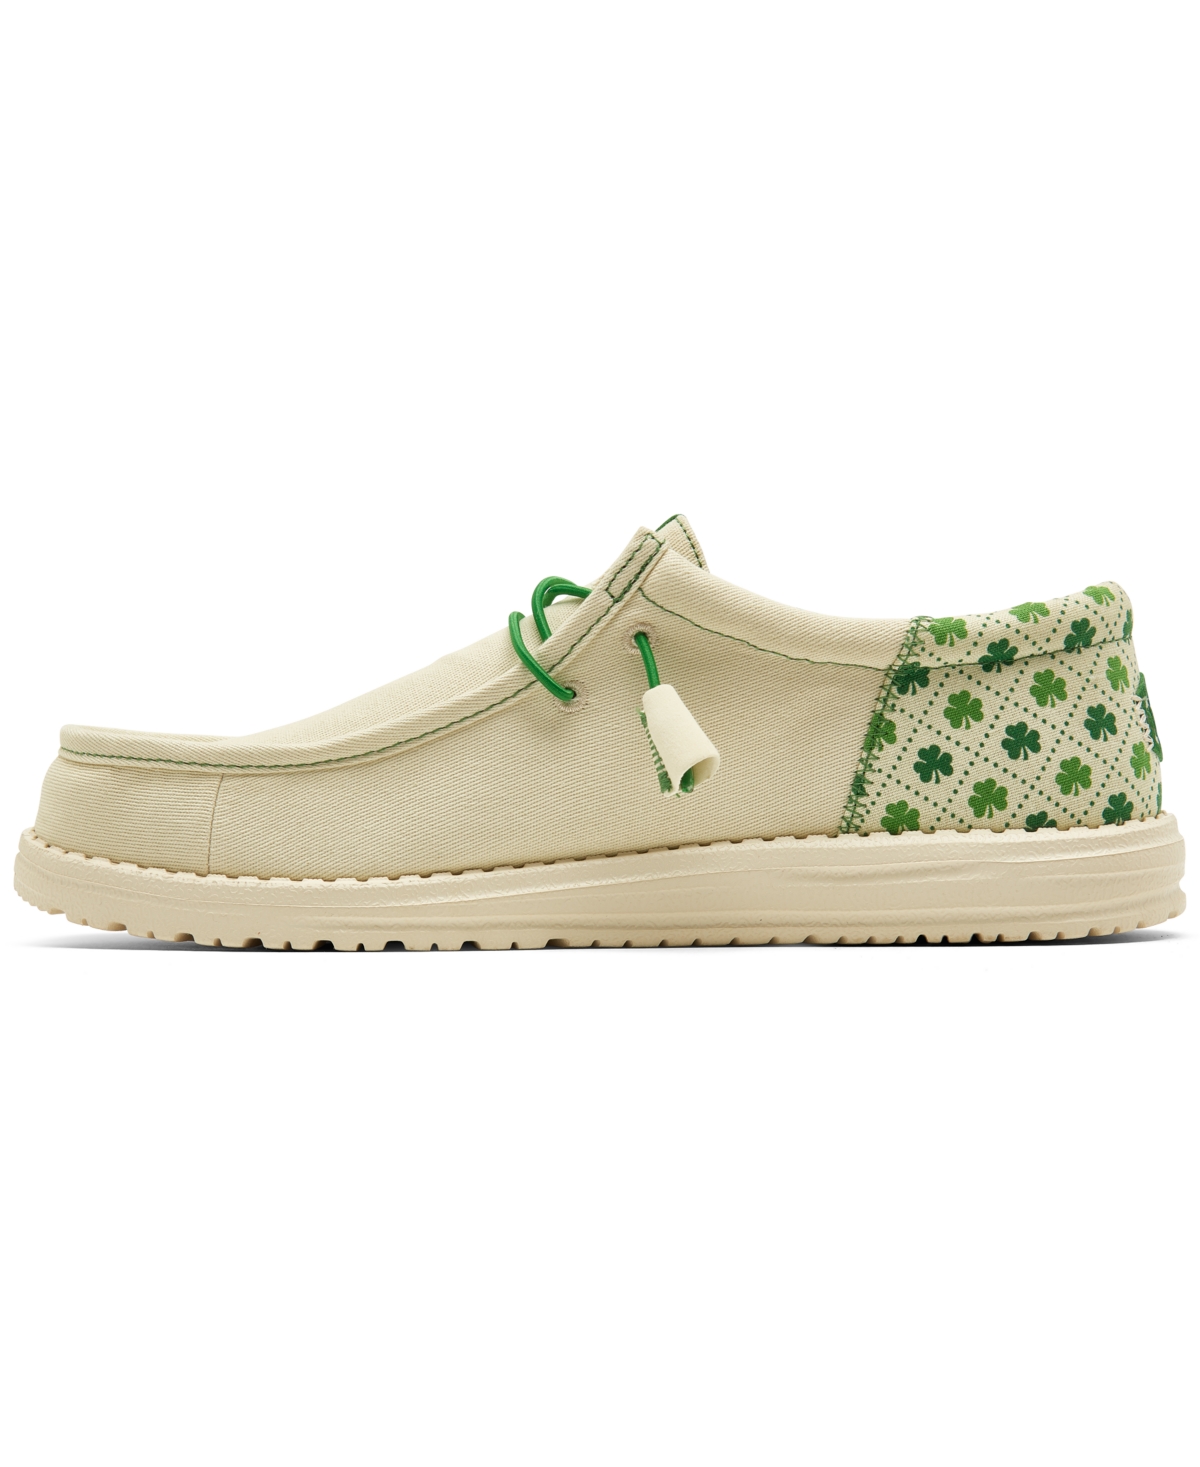 Shop Hey Dude Men's Wally Funk Luck Slip-on Casual Sneakers From Finish Line In White,shamrock